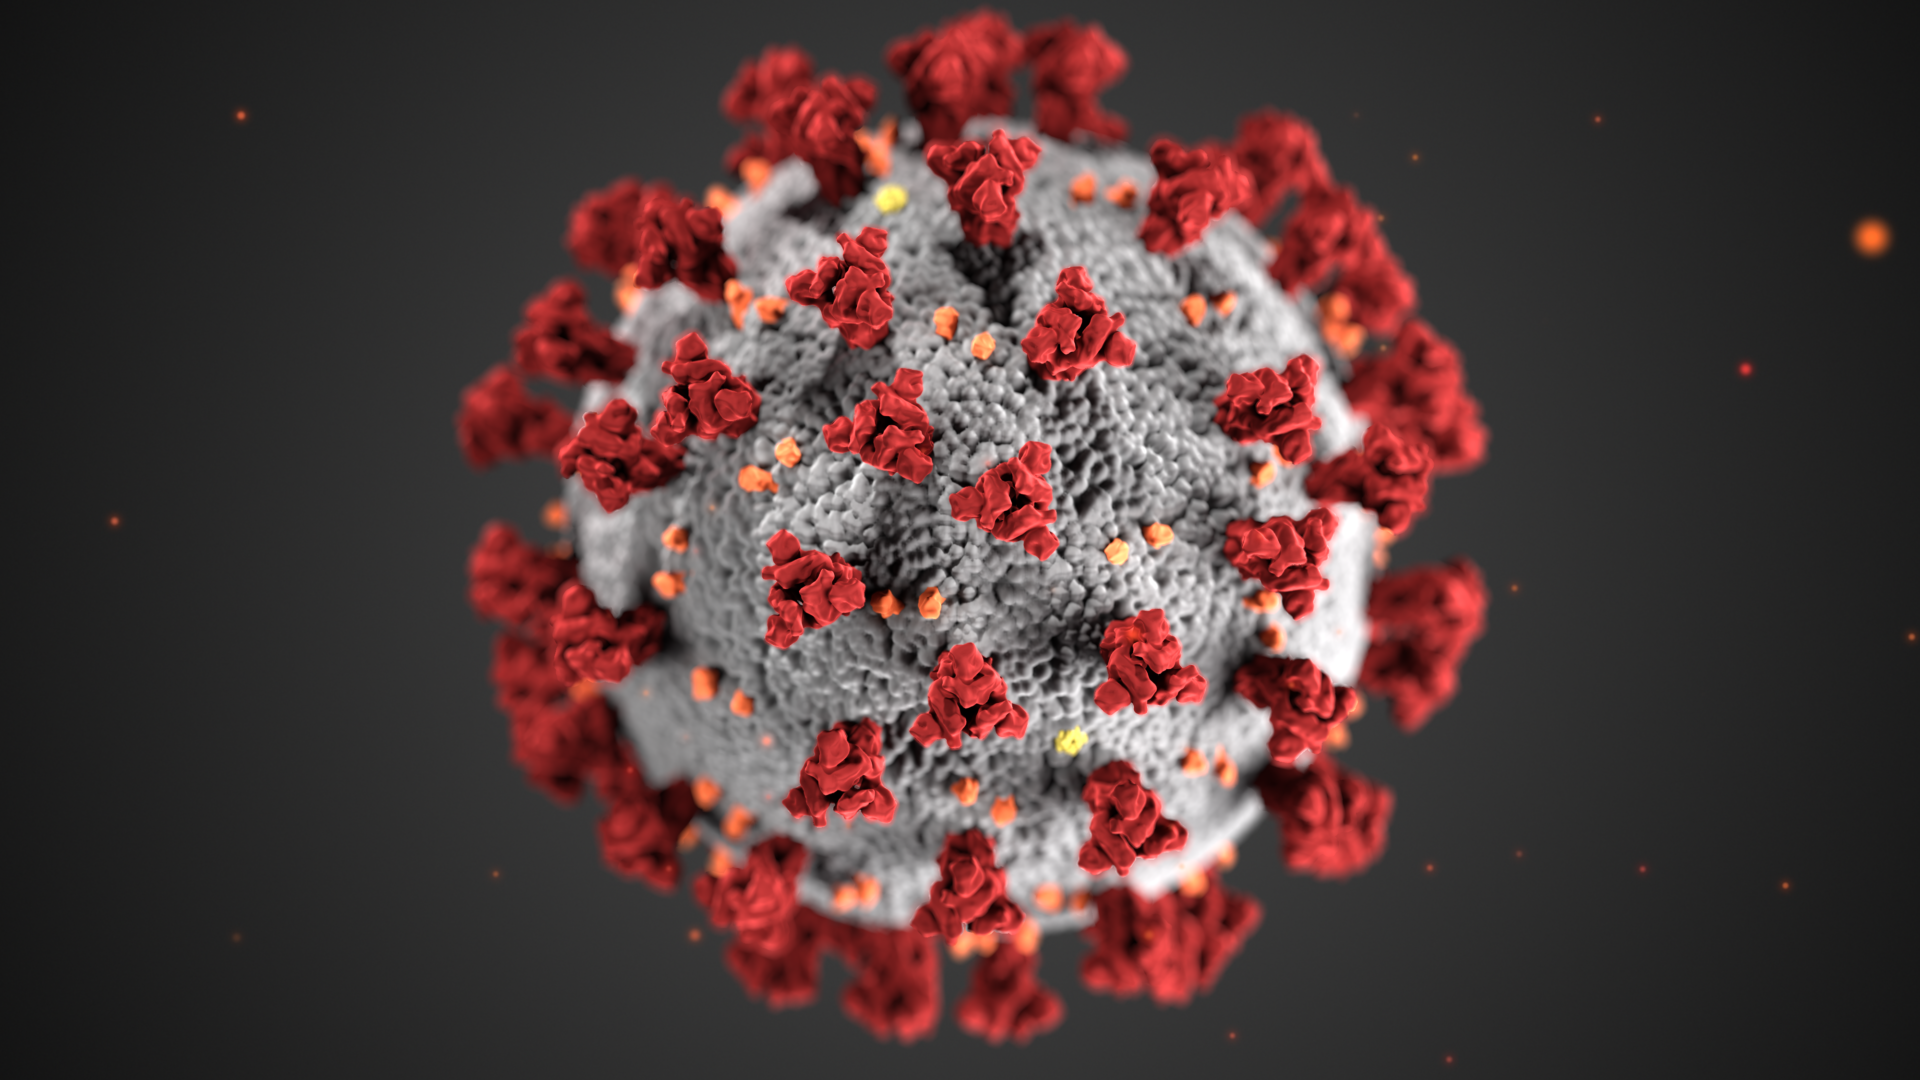 UHD associate professor Peter Li said strong government response is needed to take on the coronavirus outbreak, which has infected over 900 in the Houston area. | Courtesy of the Centers for Disease Control and Prevention